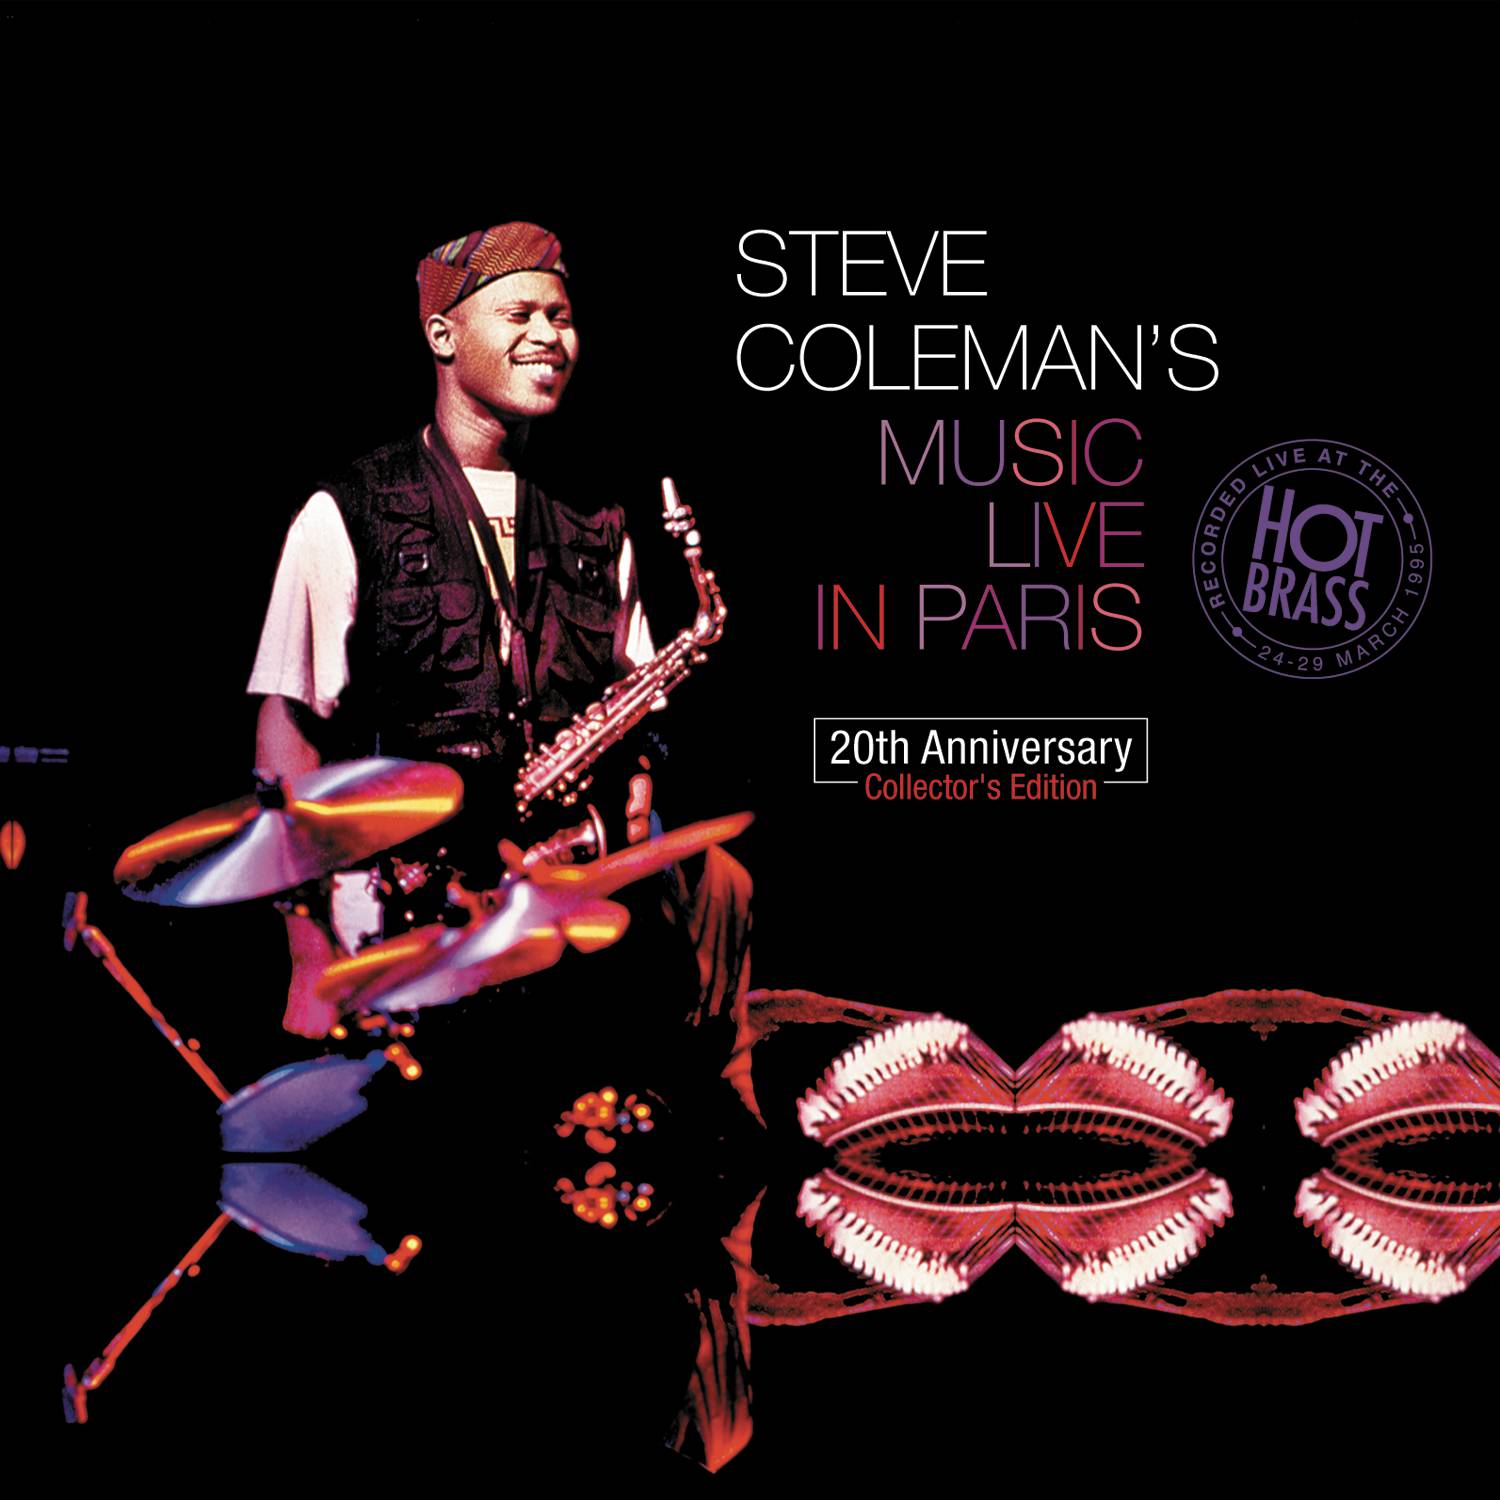 Steve Coleman's Music Live In Paris : 20th Anniversary Collector's Edition (Recorded live at the Hot Brass: 24 - 29 March 1995 (Remastering 2015))